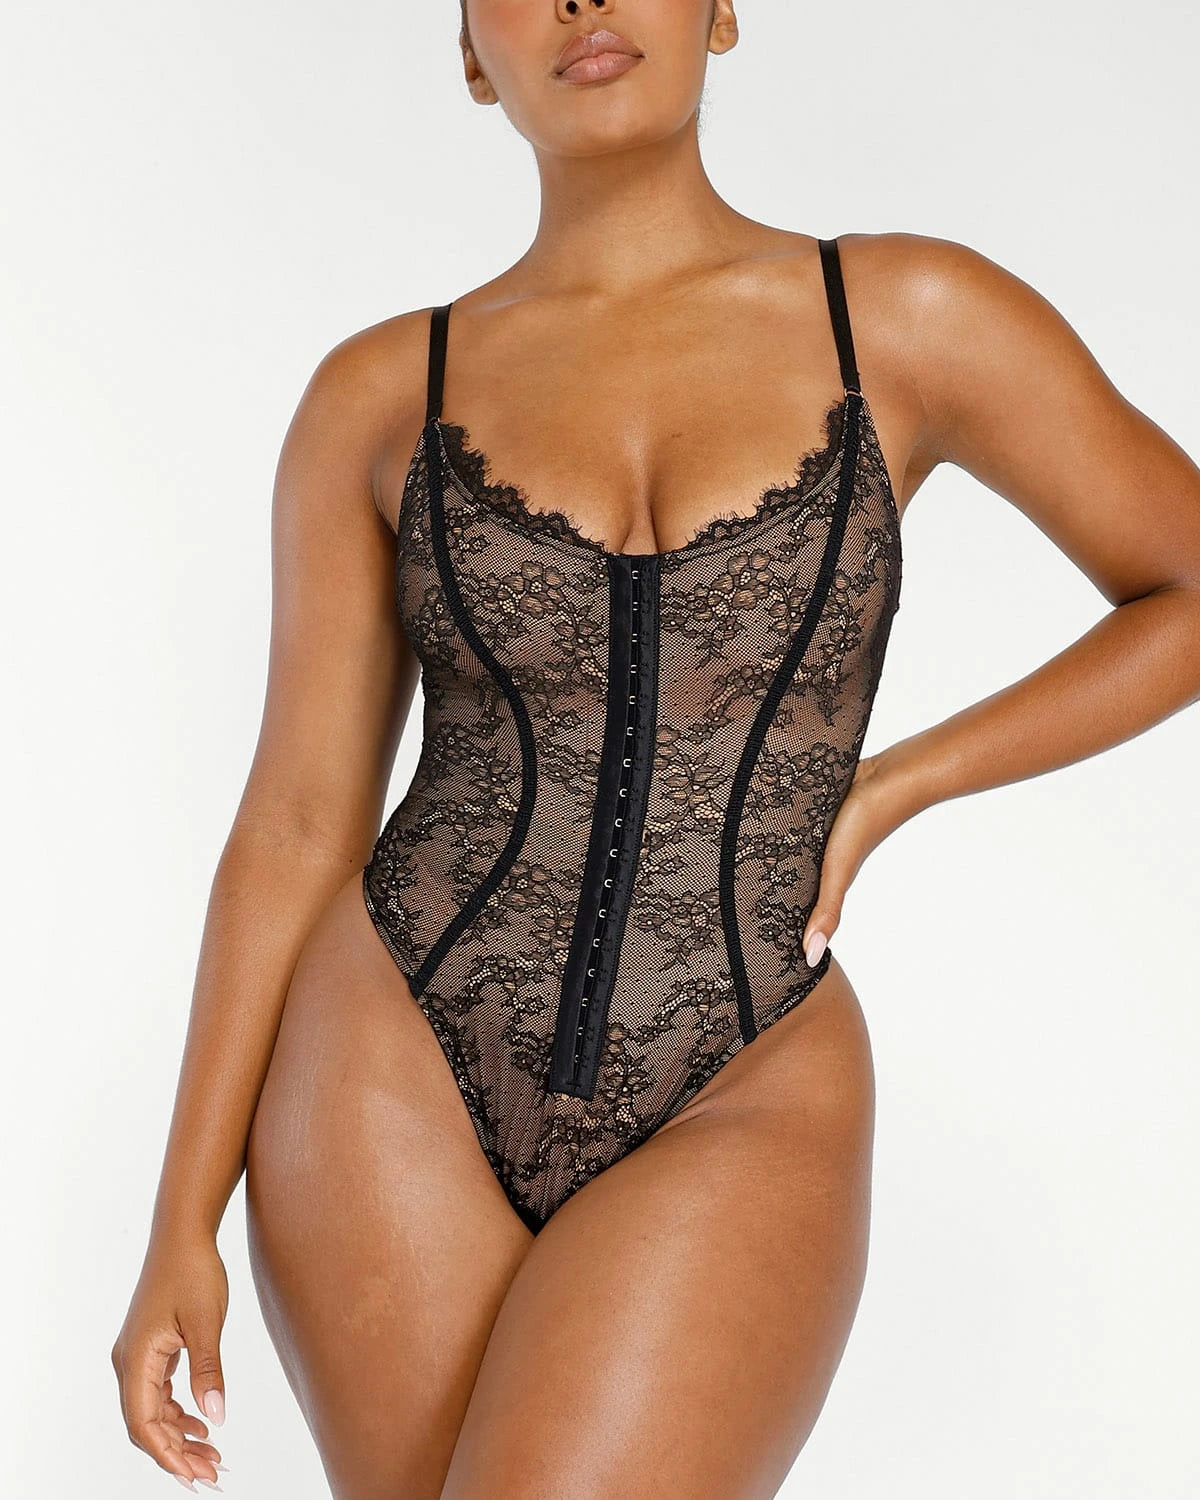 Lace Glamour Flawless Fit Thong Bodysuit